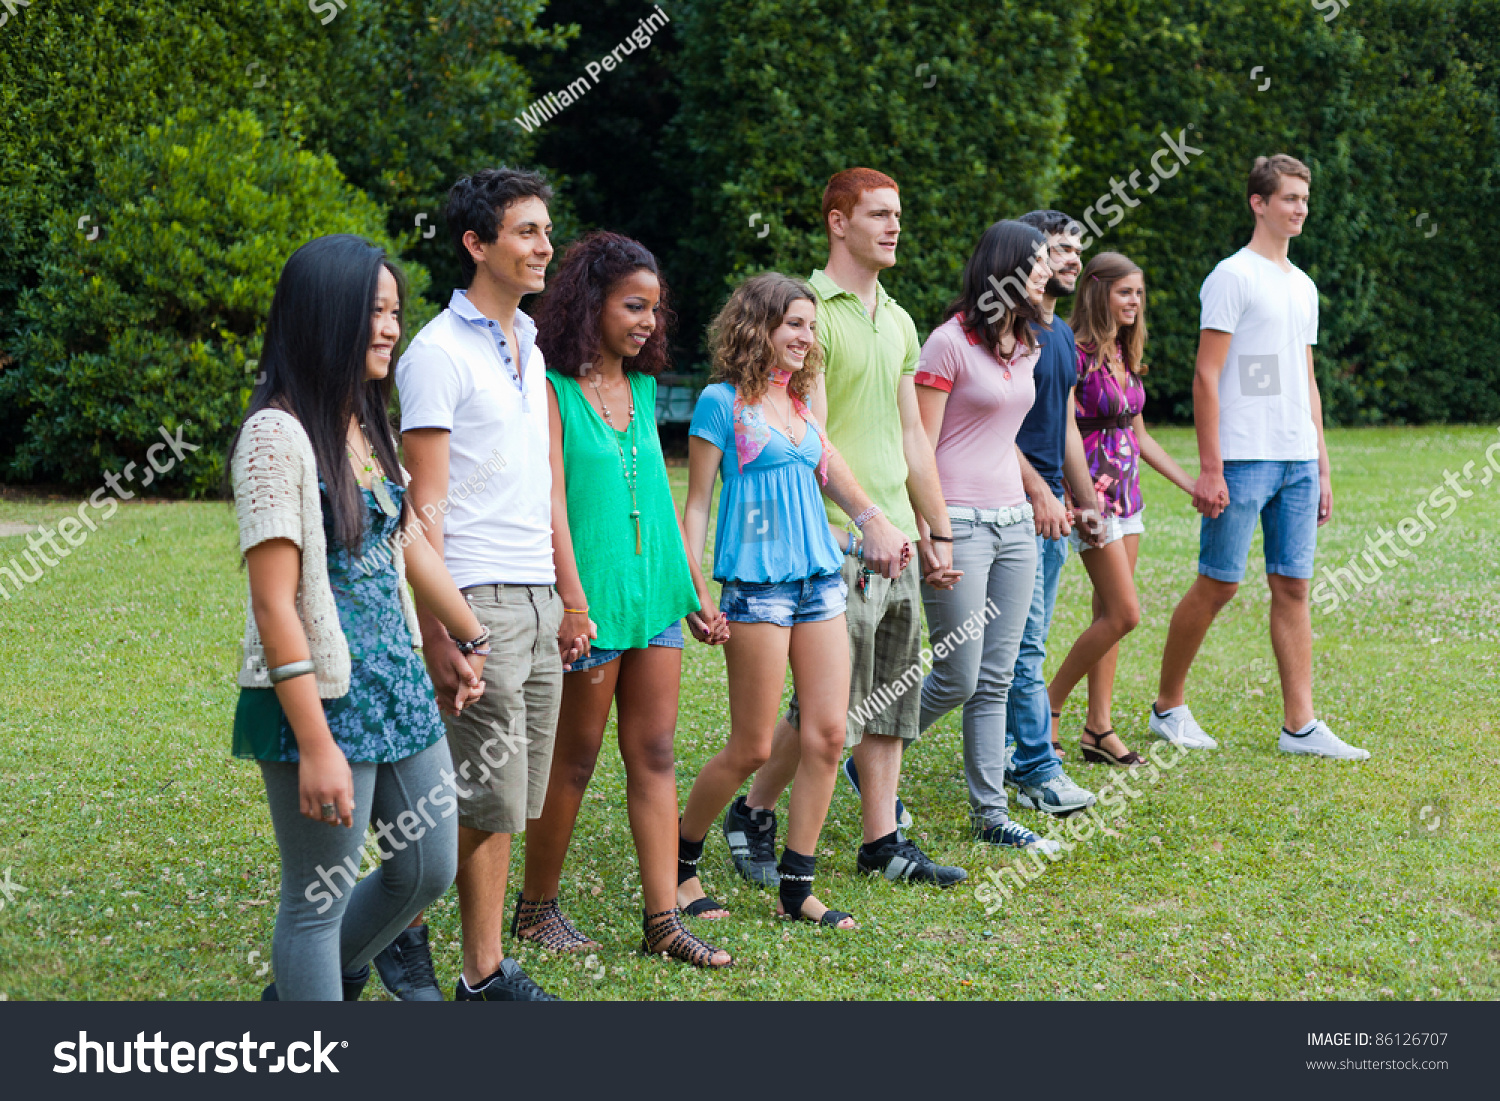 Group Of Teenagers At Park Stock Photo 86126707 : Shutterstock